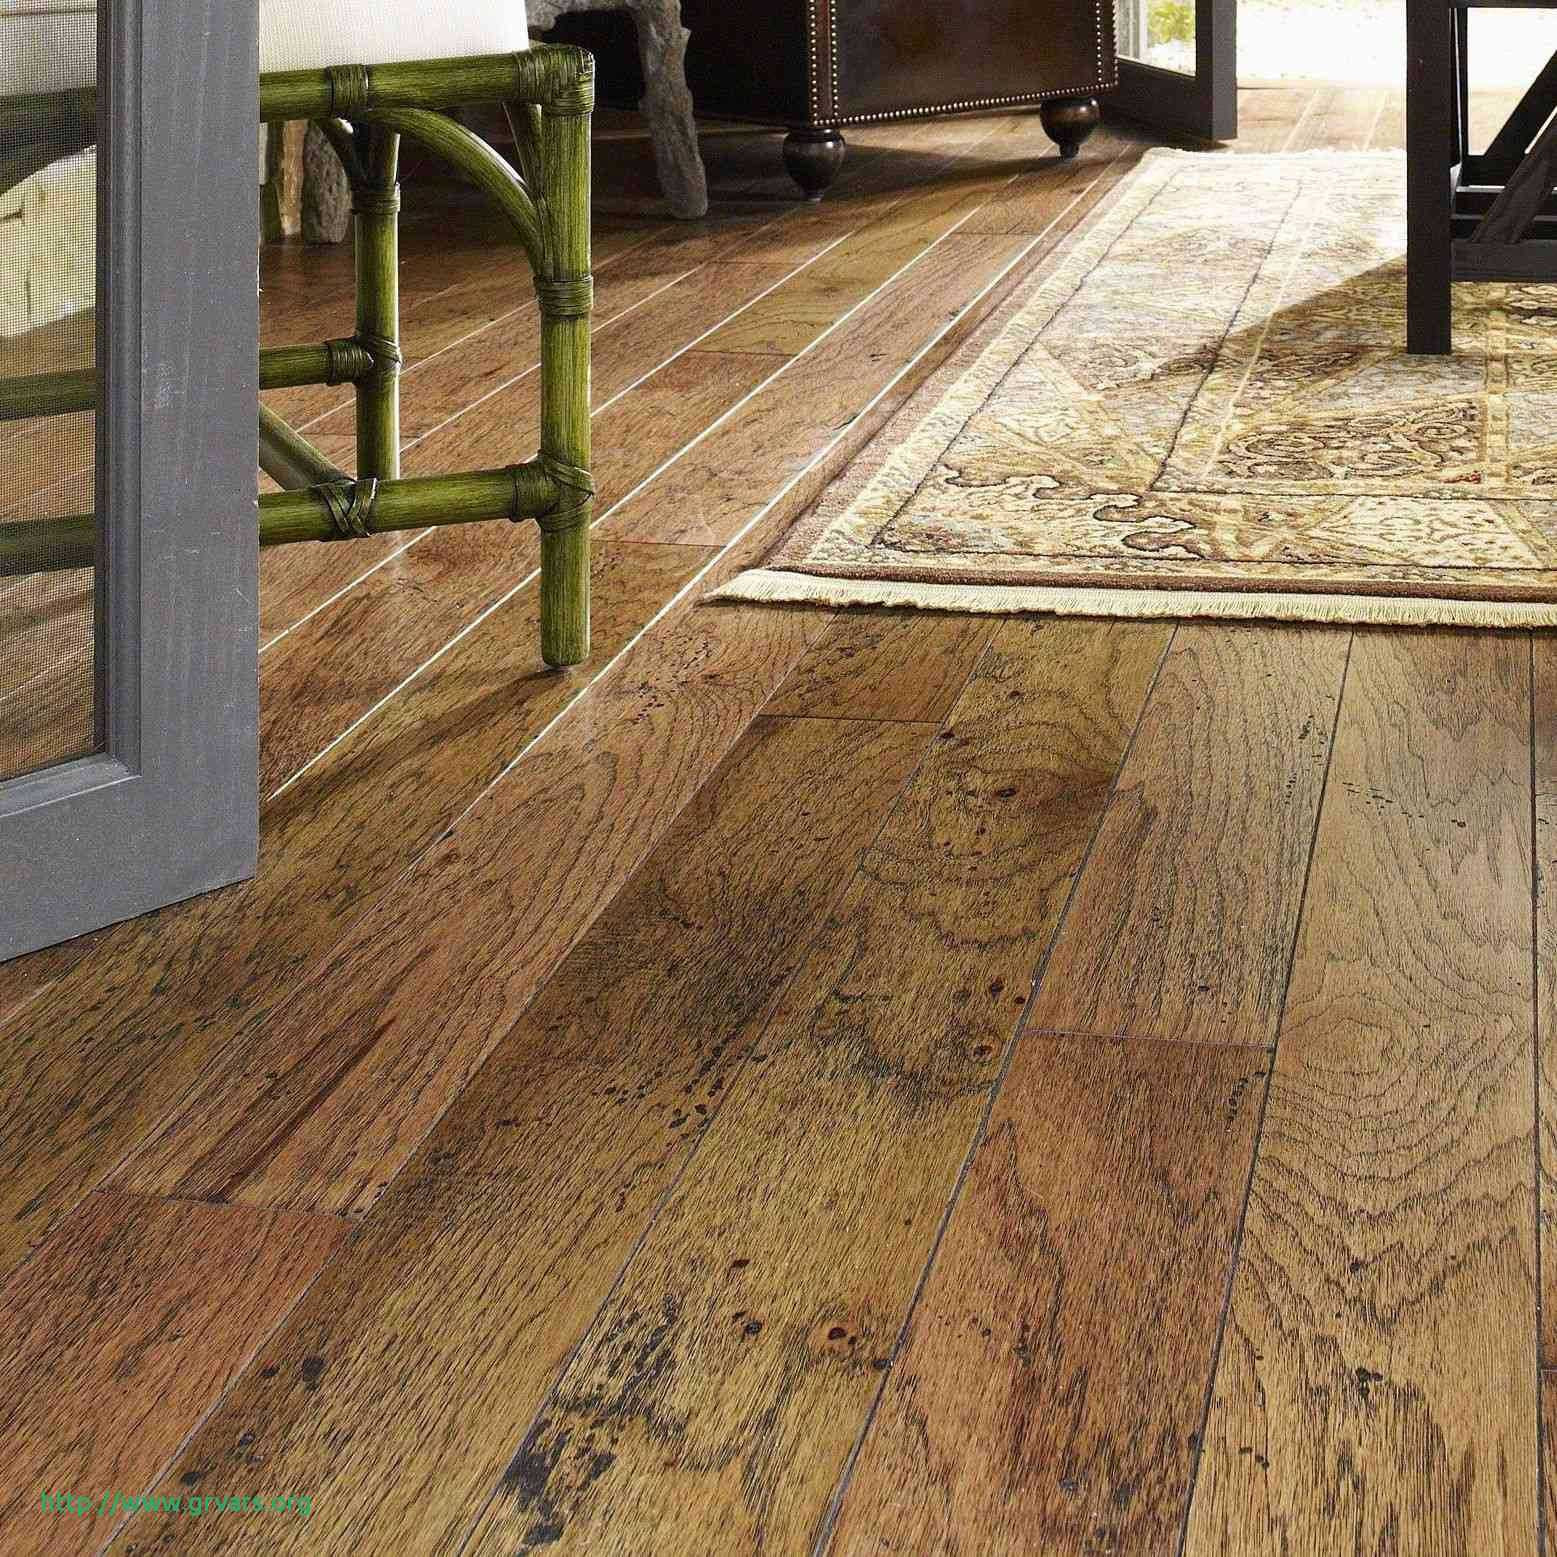 30 attractive How to Install Fake Hardwood Floors 2024 free download how to install fake hardwood floors of 19 luxe laying wood floors over concrete ideas blog inside hardwood floor designs new best type wood flooring best floor floor wood floor wood 0d putti